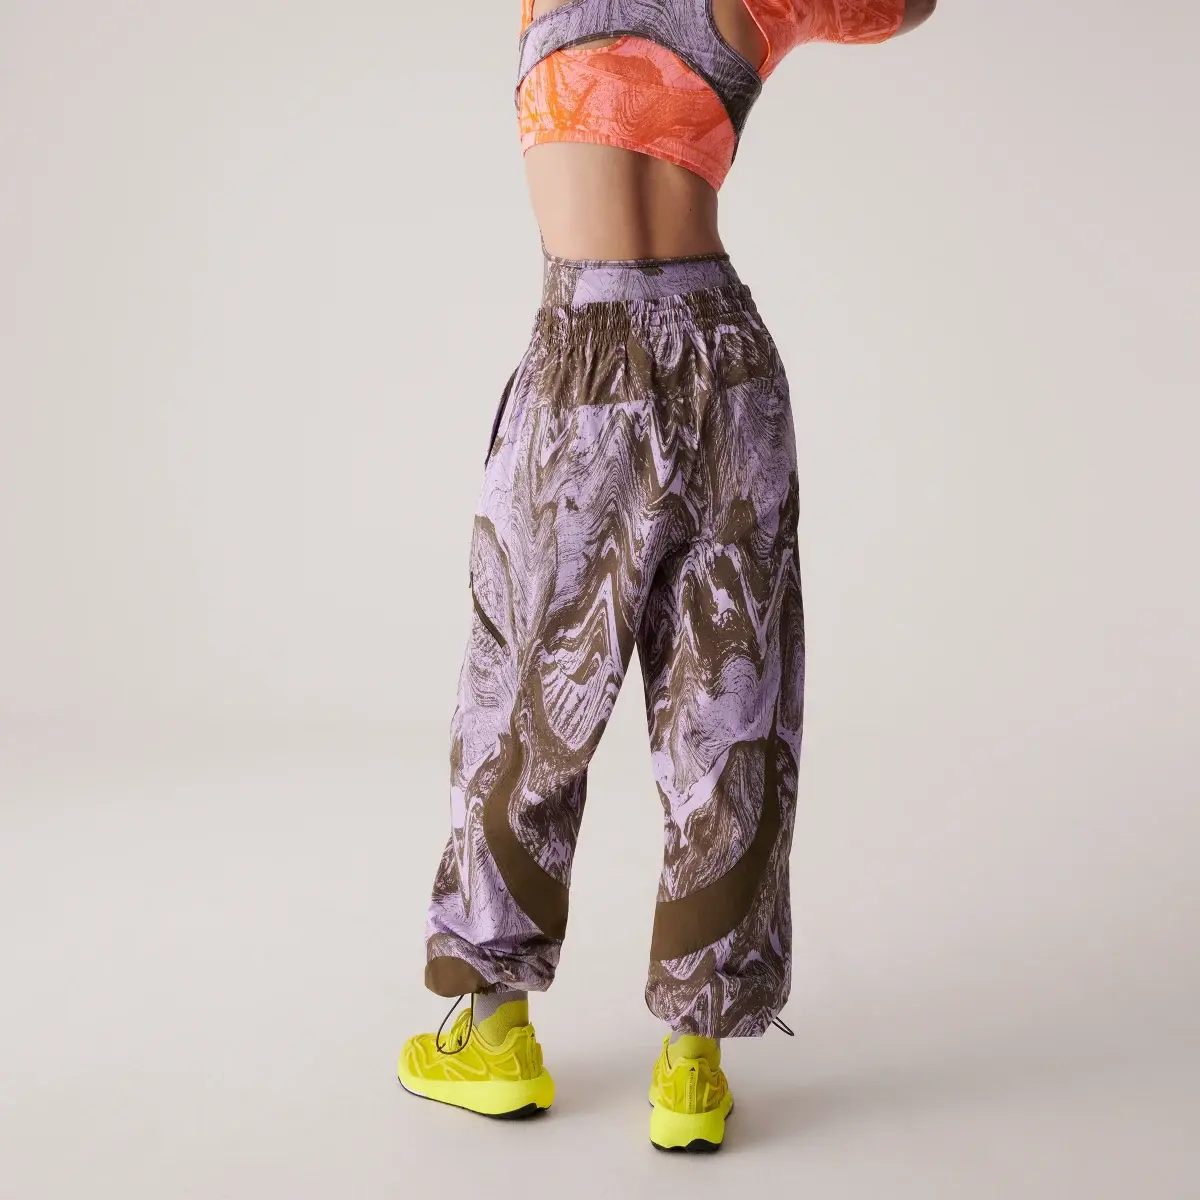 Adidas by Stella McCartney TrueCasuals Woven Track Pants. 3